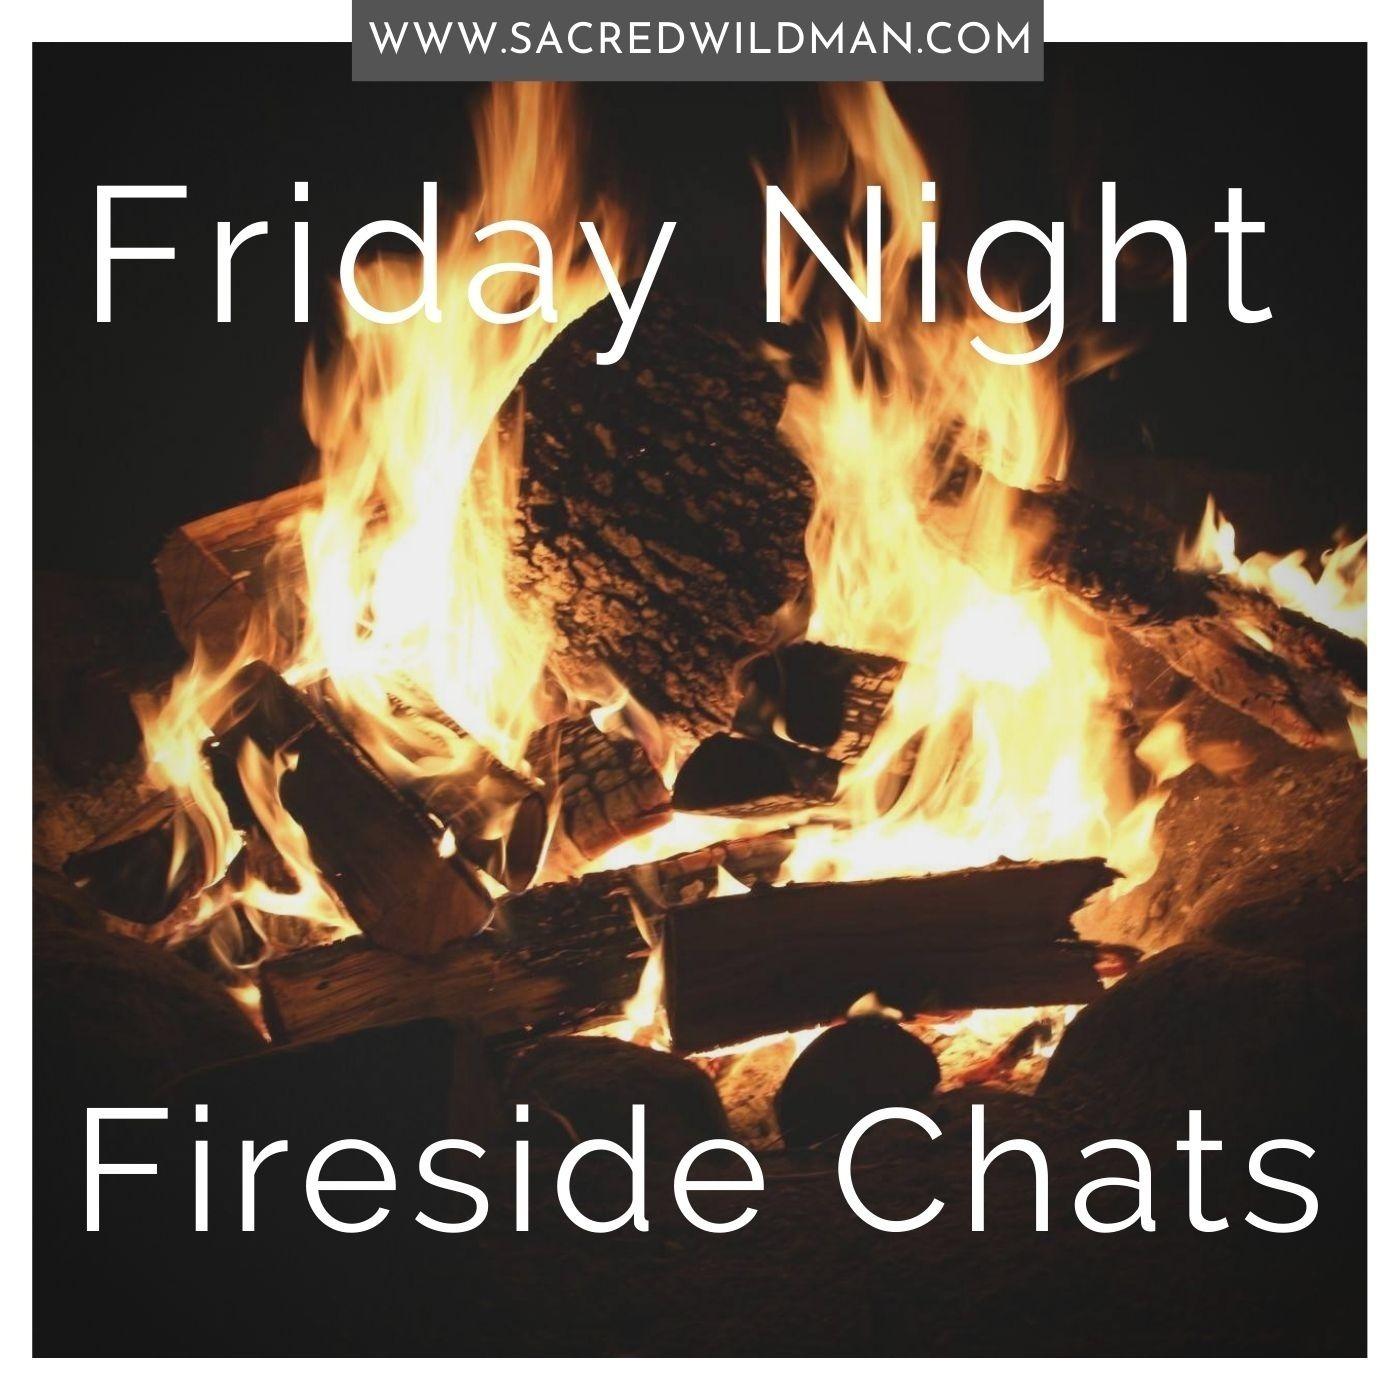 Friday Night Fireside Chats